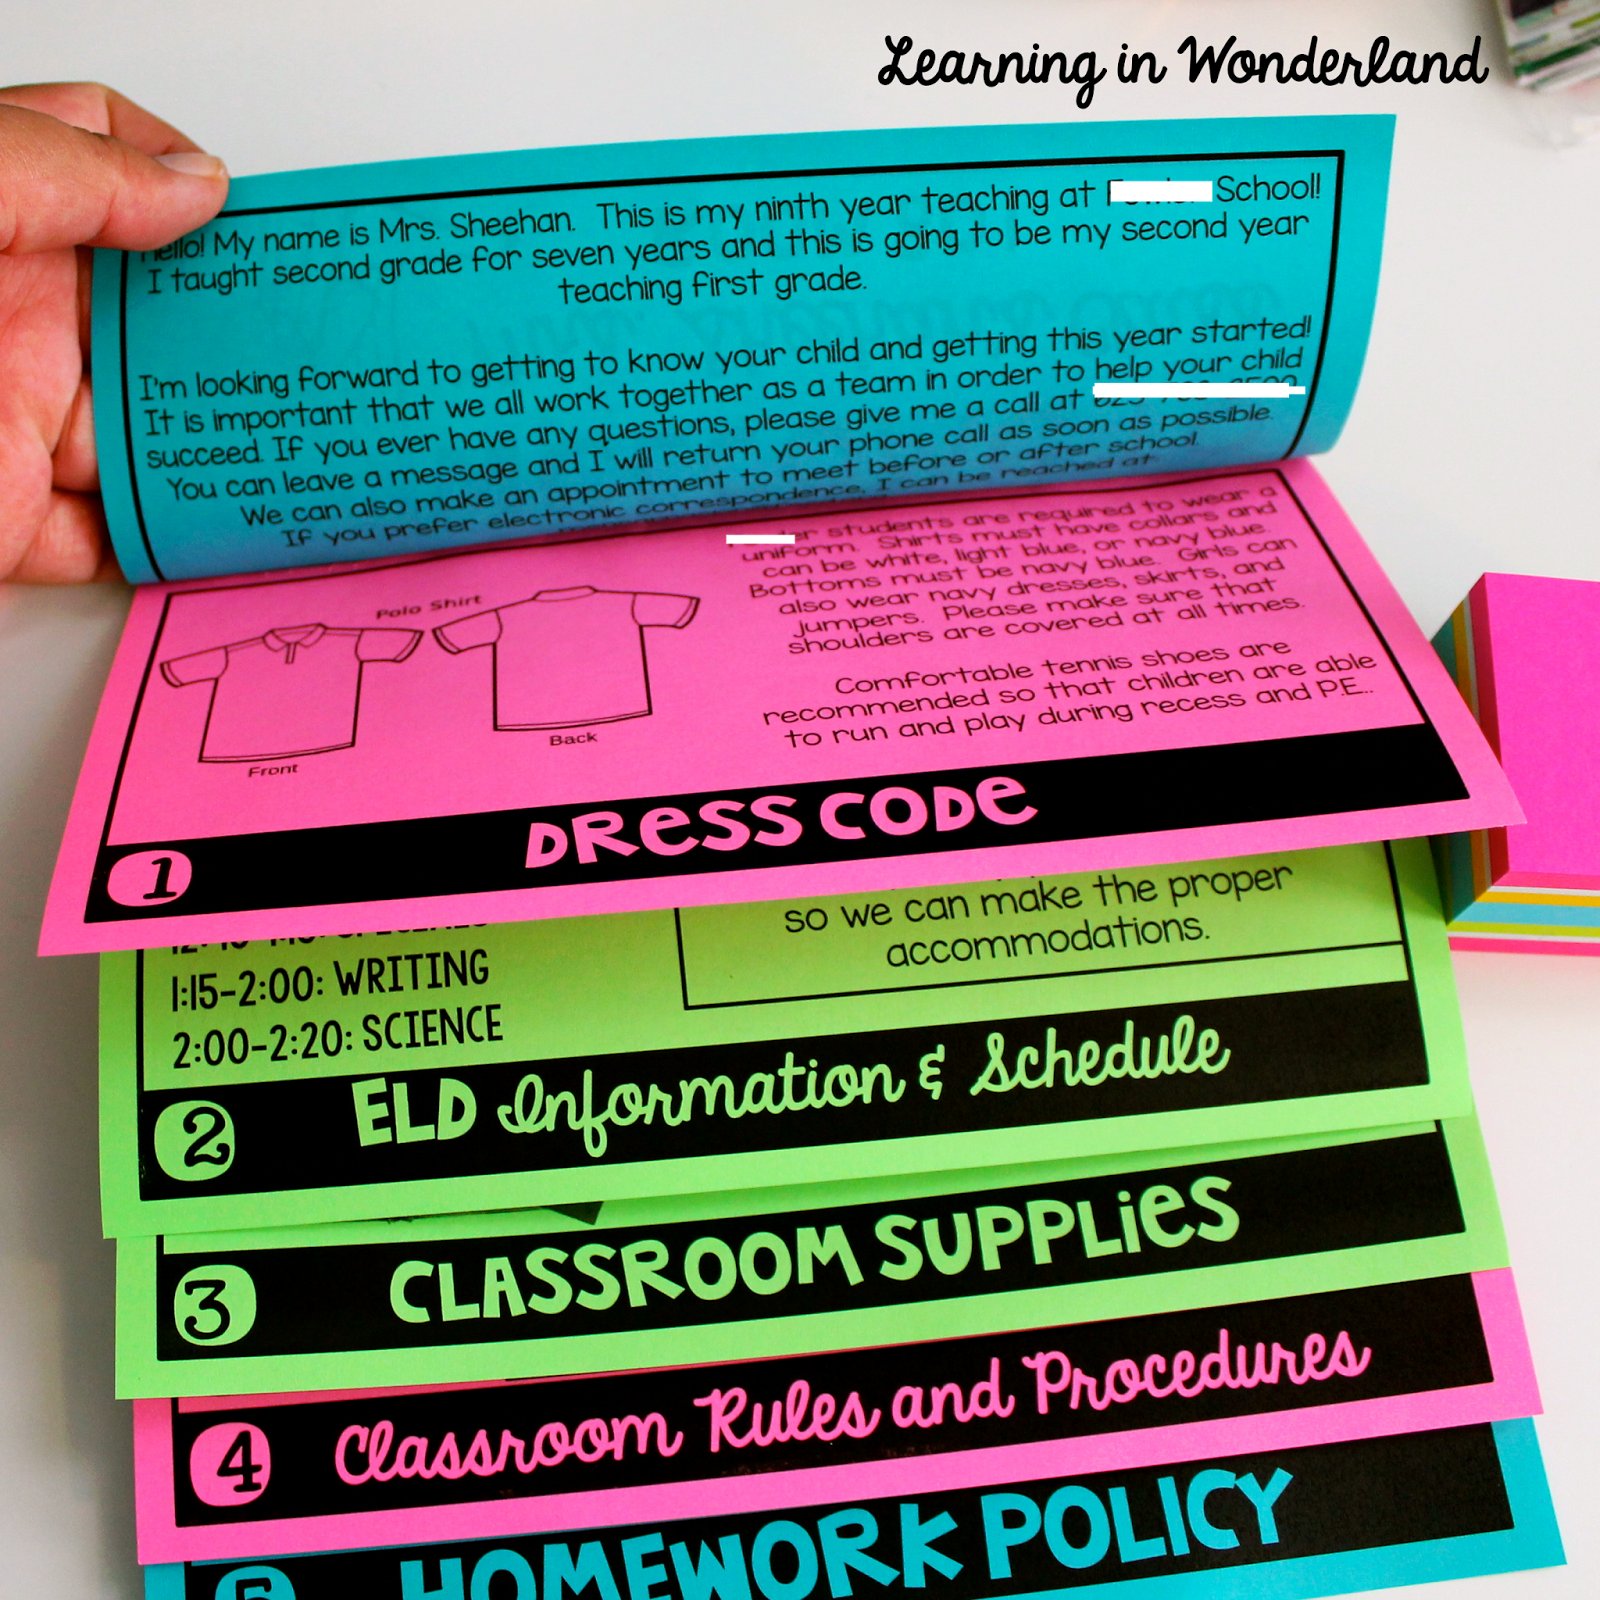 Post loaded with ideas to include in your back-to-school flip book!